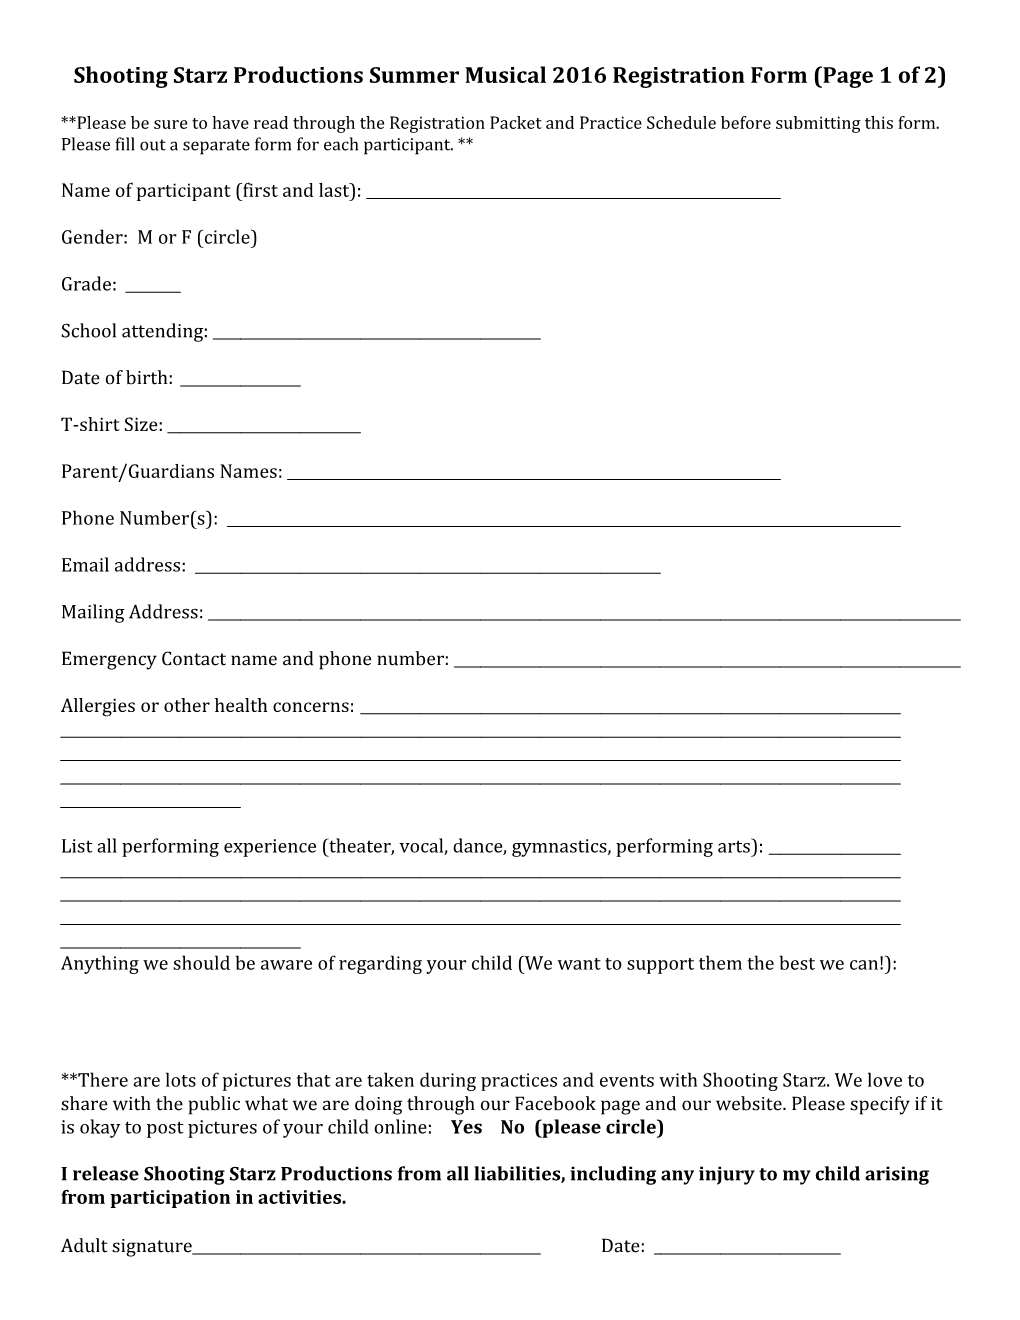 Shooting Starz Productions Summer Musical 2016 Registration Form (Page 1 of 2)